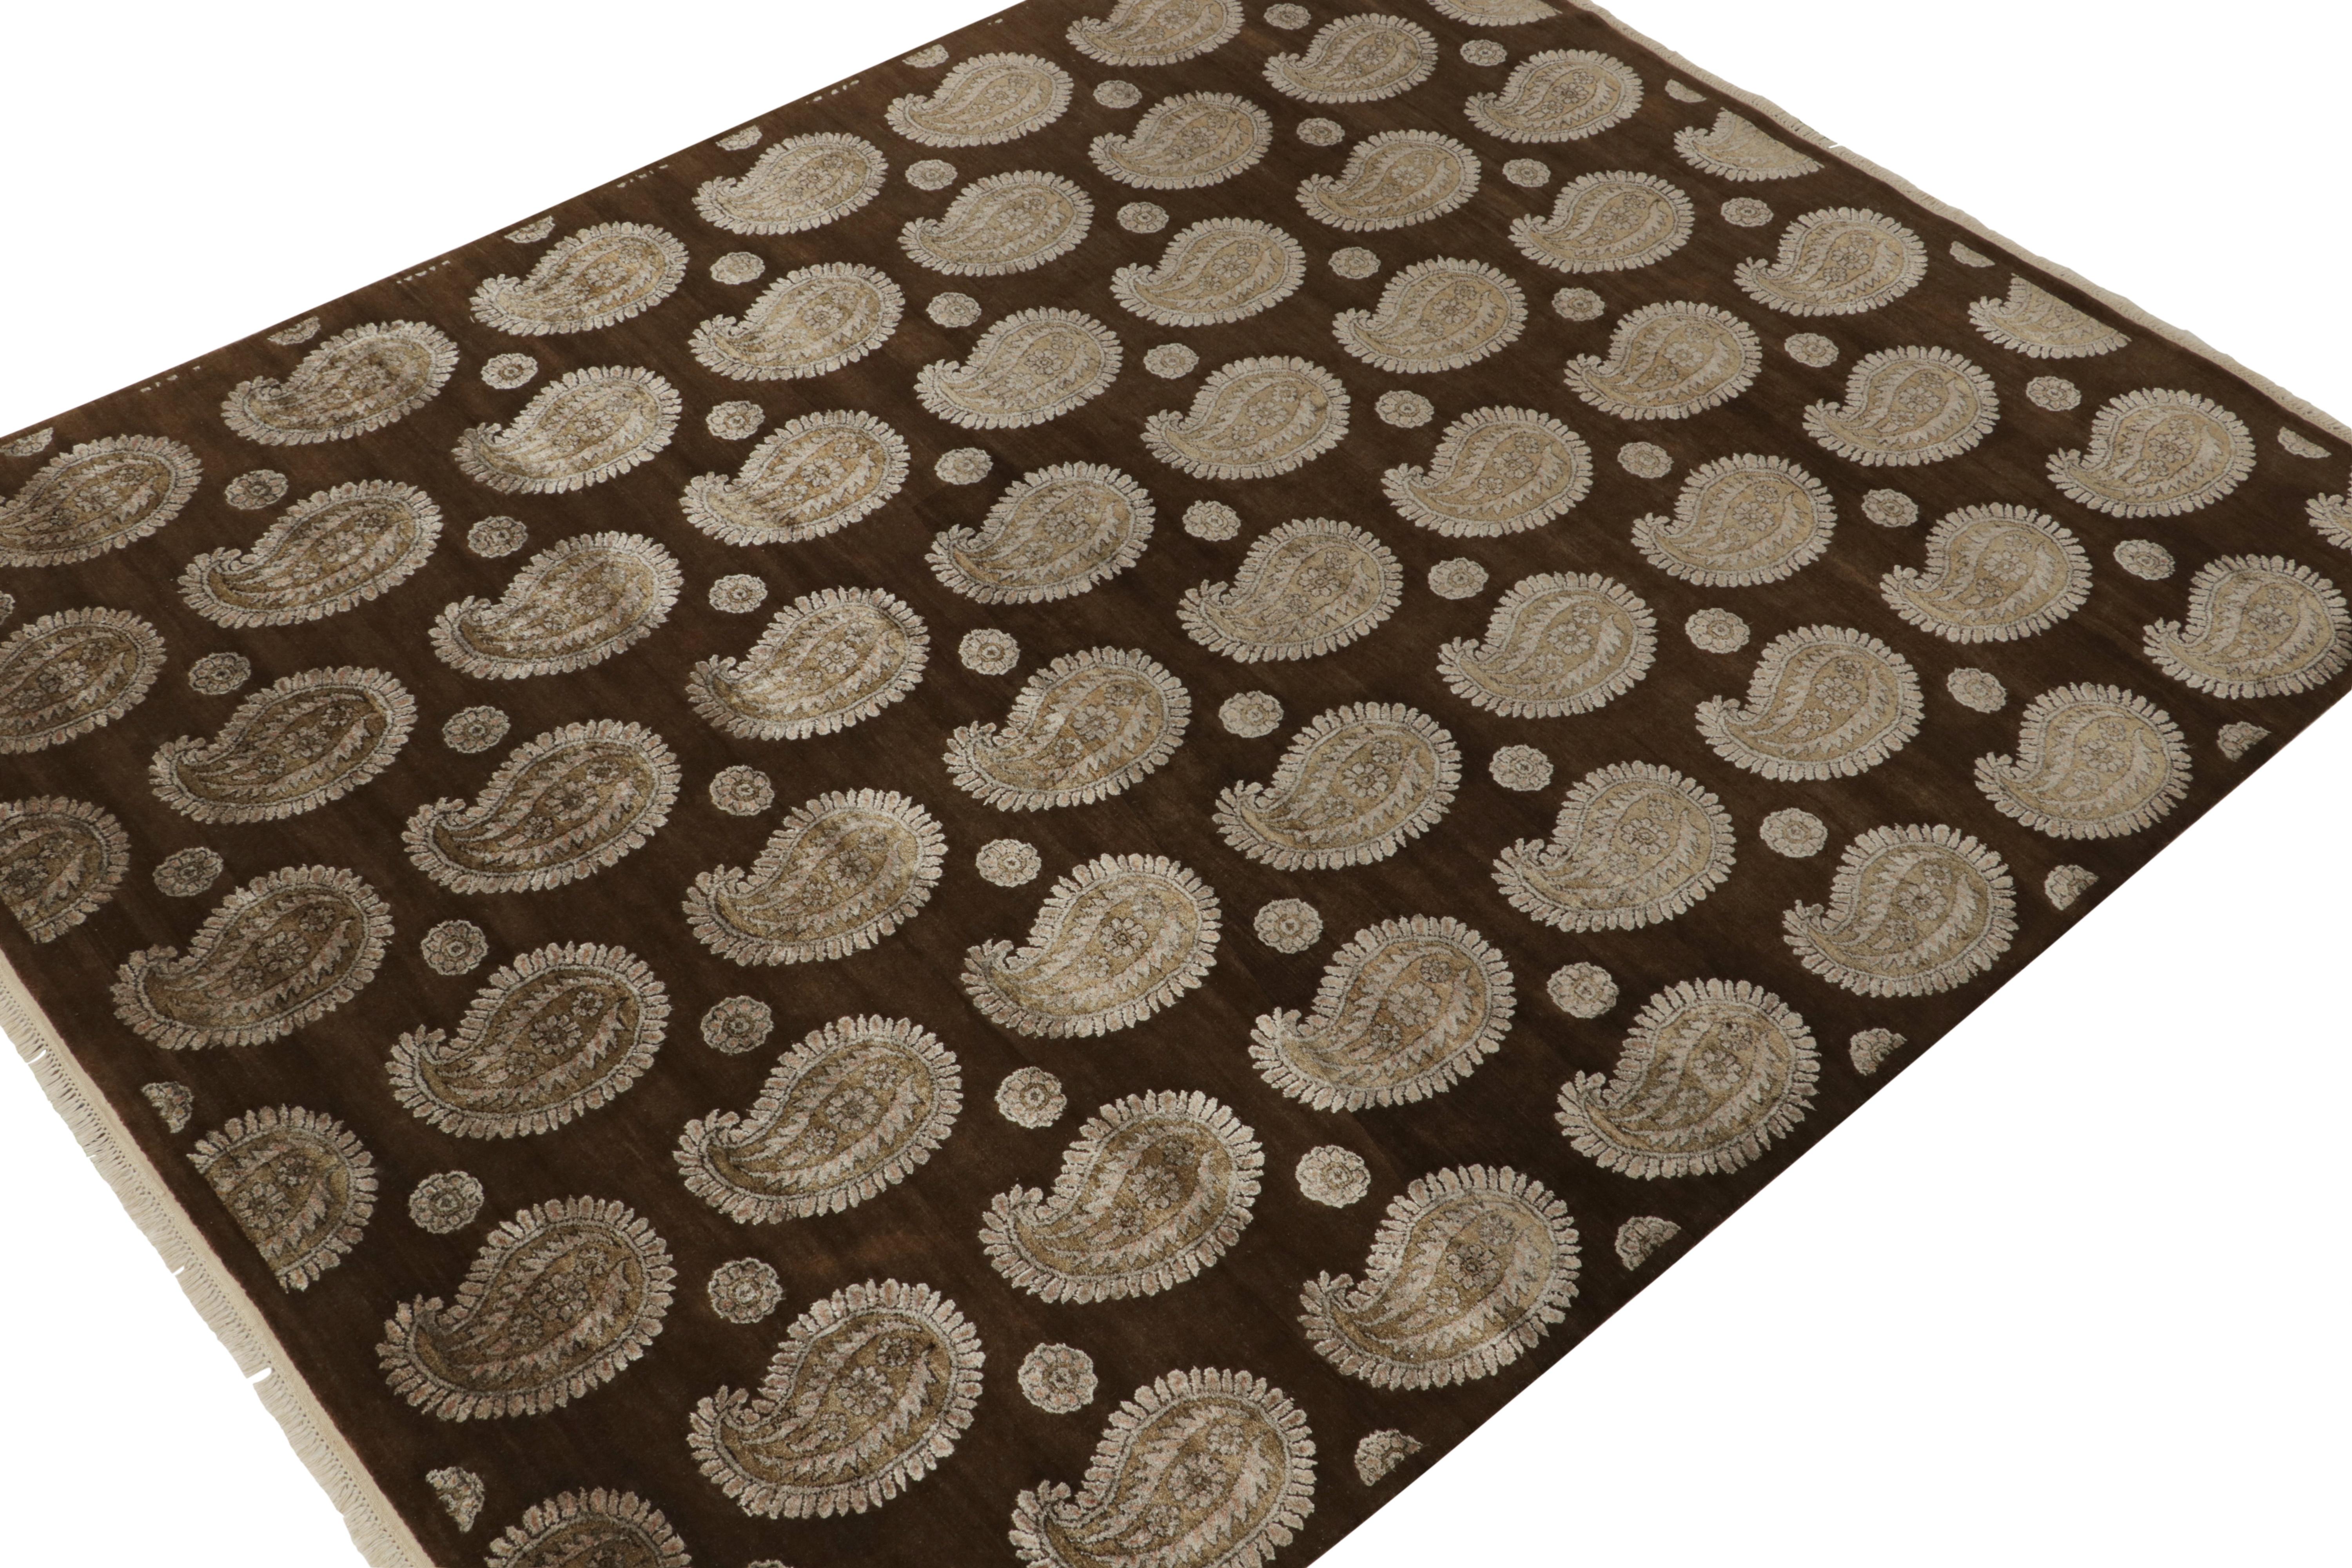 An 8x10 rug inspired from traditional rug styles, from Rug & Kilim’s Modern Classics Collection. Hand-knotted in wool, boasting golden-beige paisley patterns on a chocolate brown background in tasteful repetition.
Further On the Design:
The play